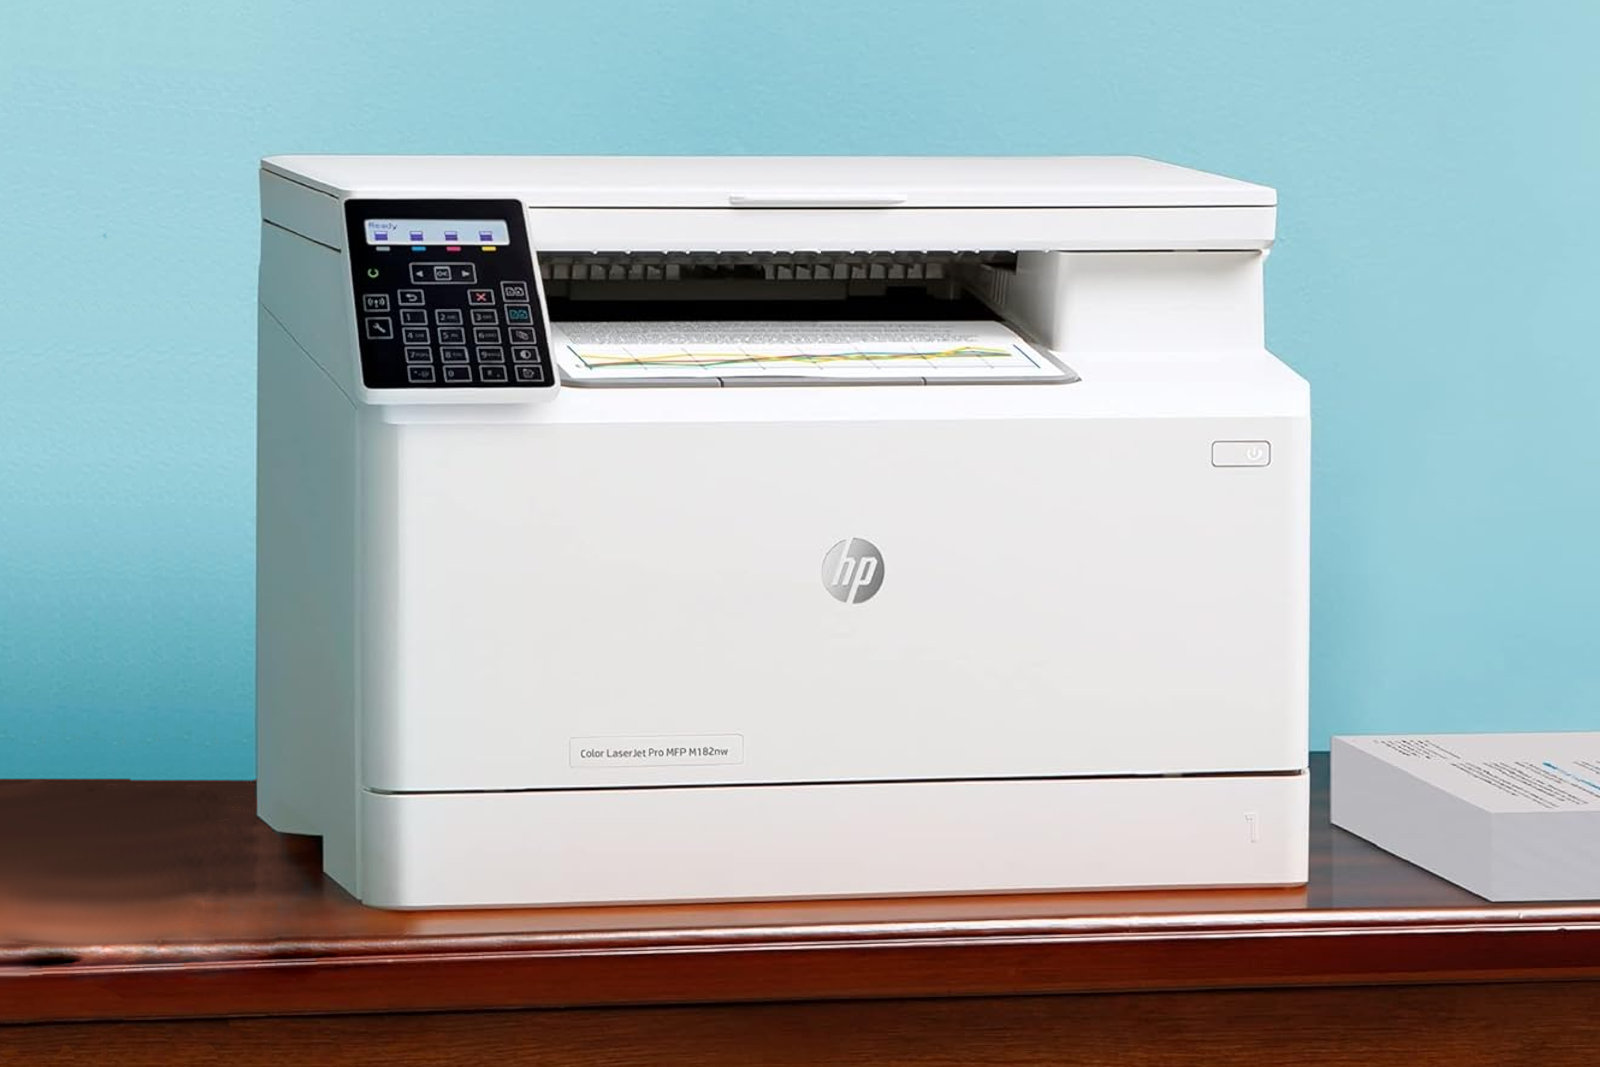 HP LaserJet Pro MFP M182nw rests beside a stack of printed documents.